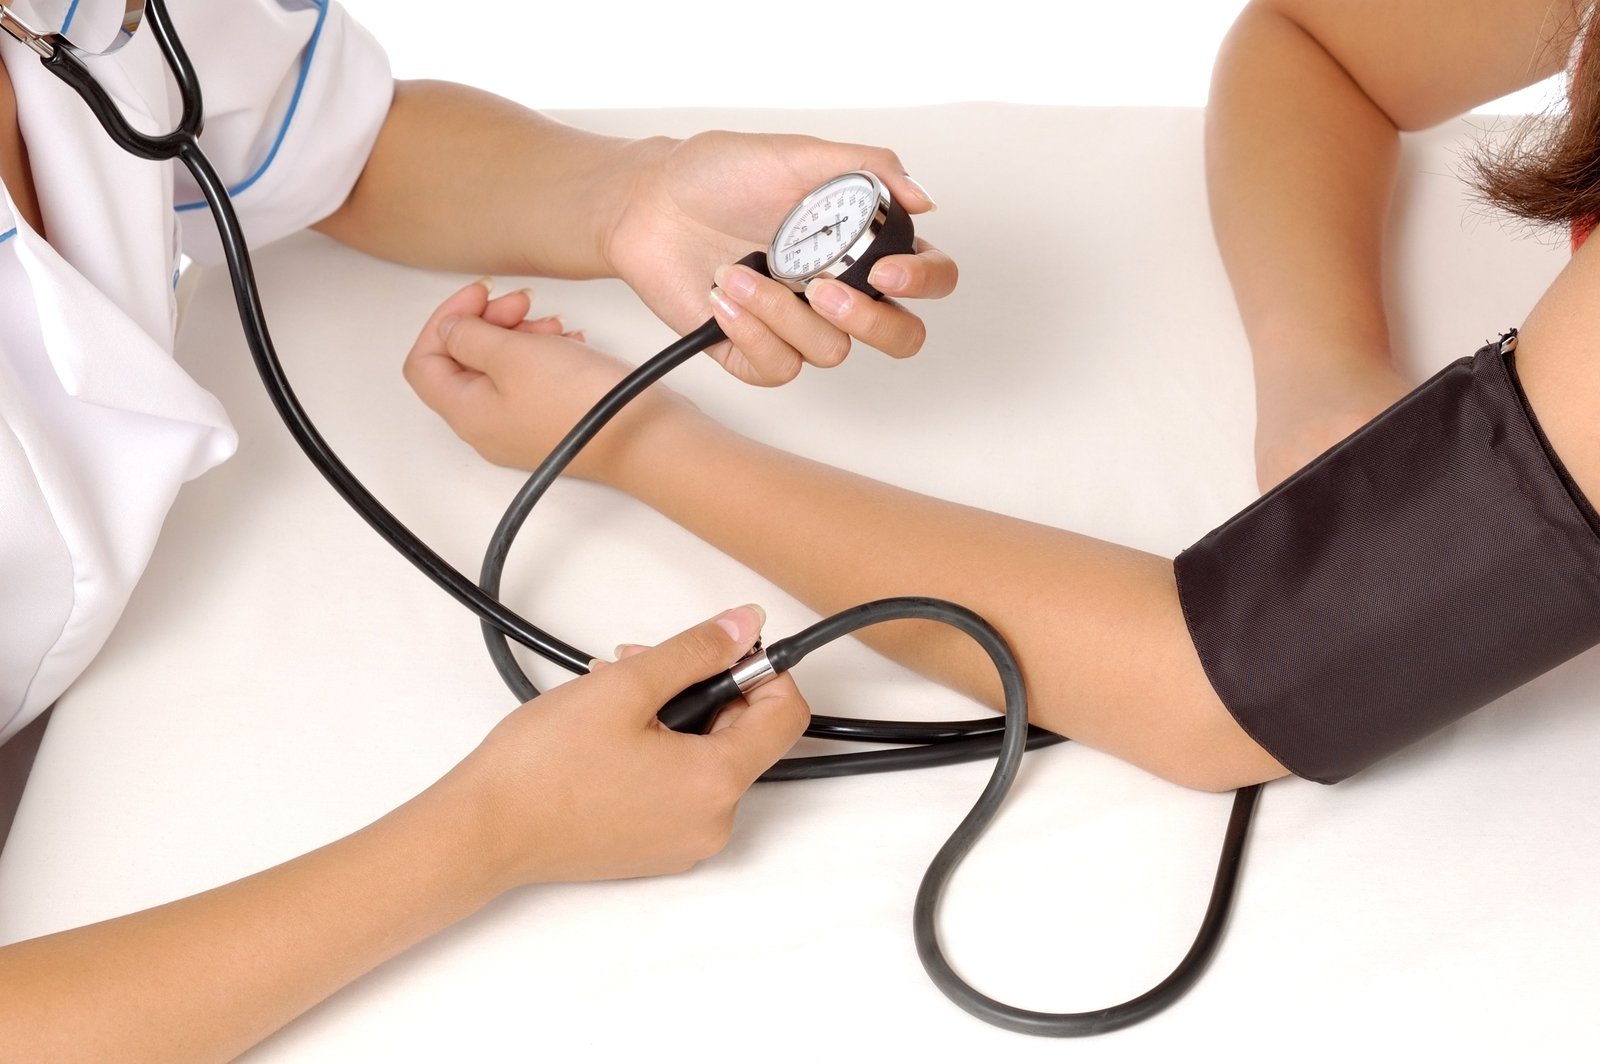 Blood pressure tips and treatment at AFC Urgent Care